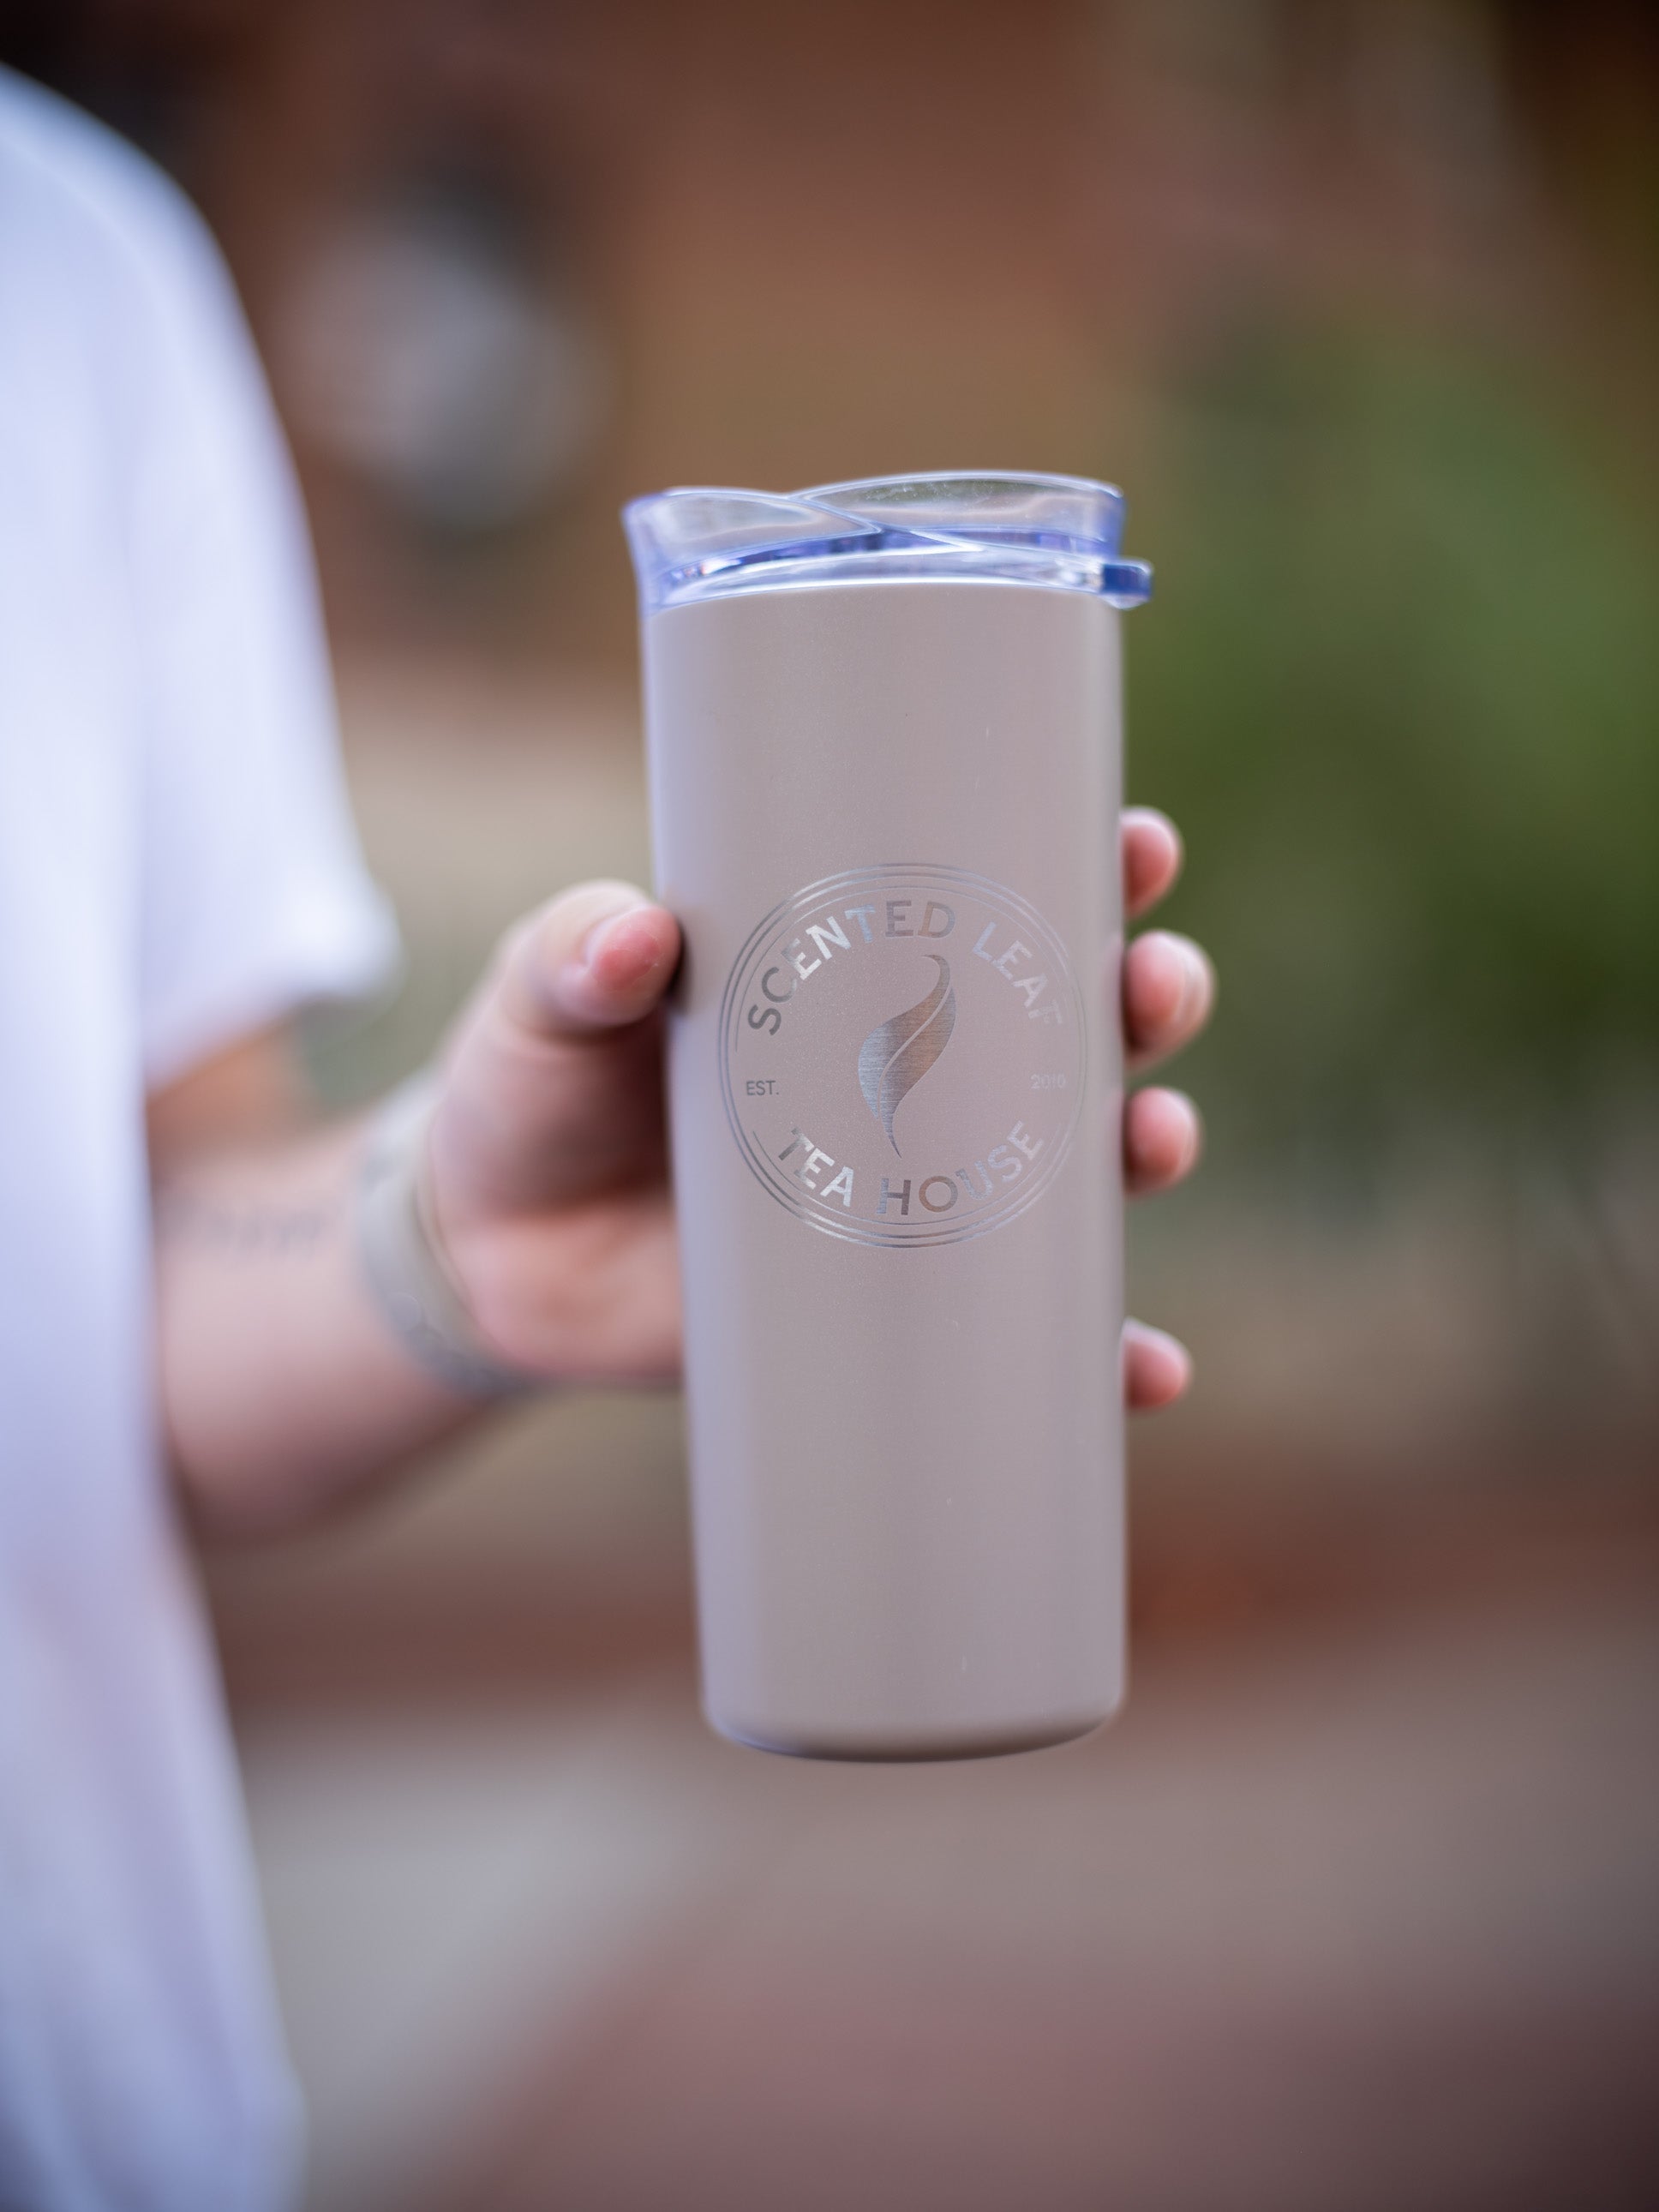 HOT/COLD STAINLESS STEEL TUMBLER